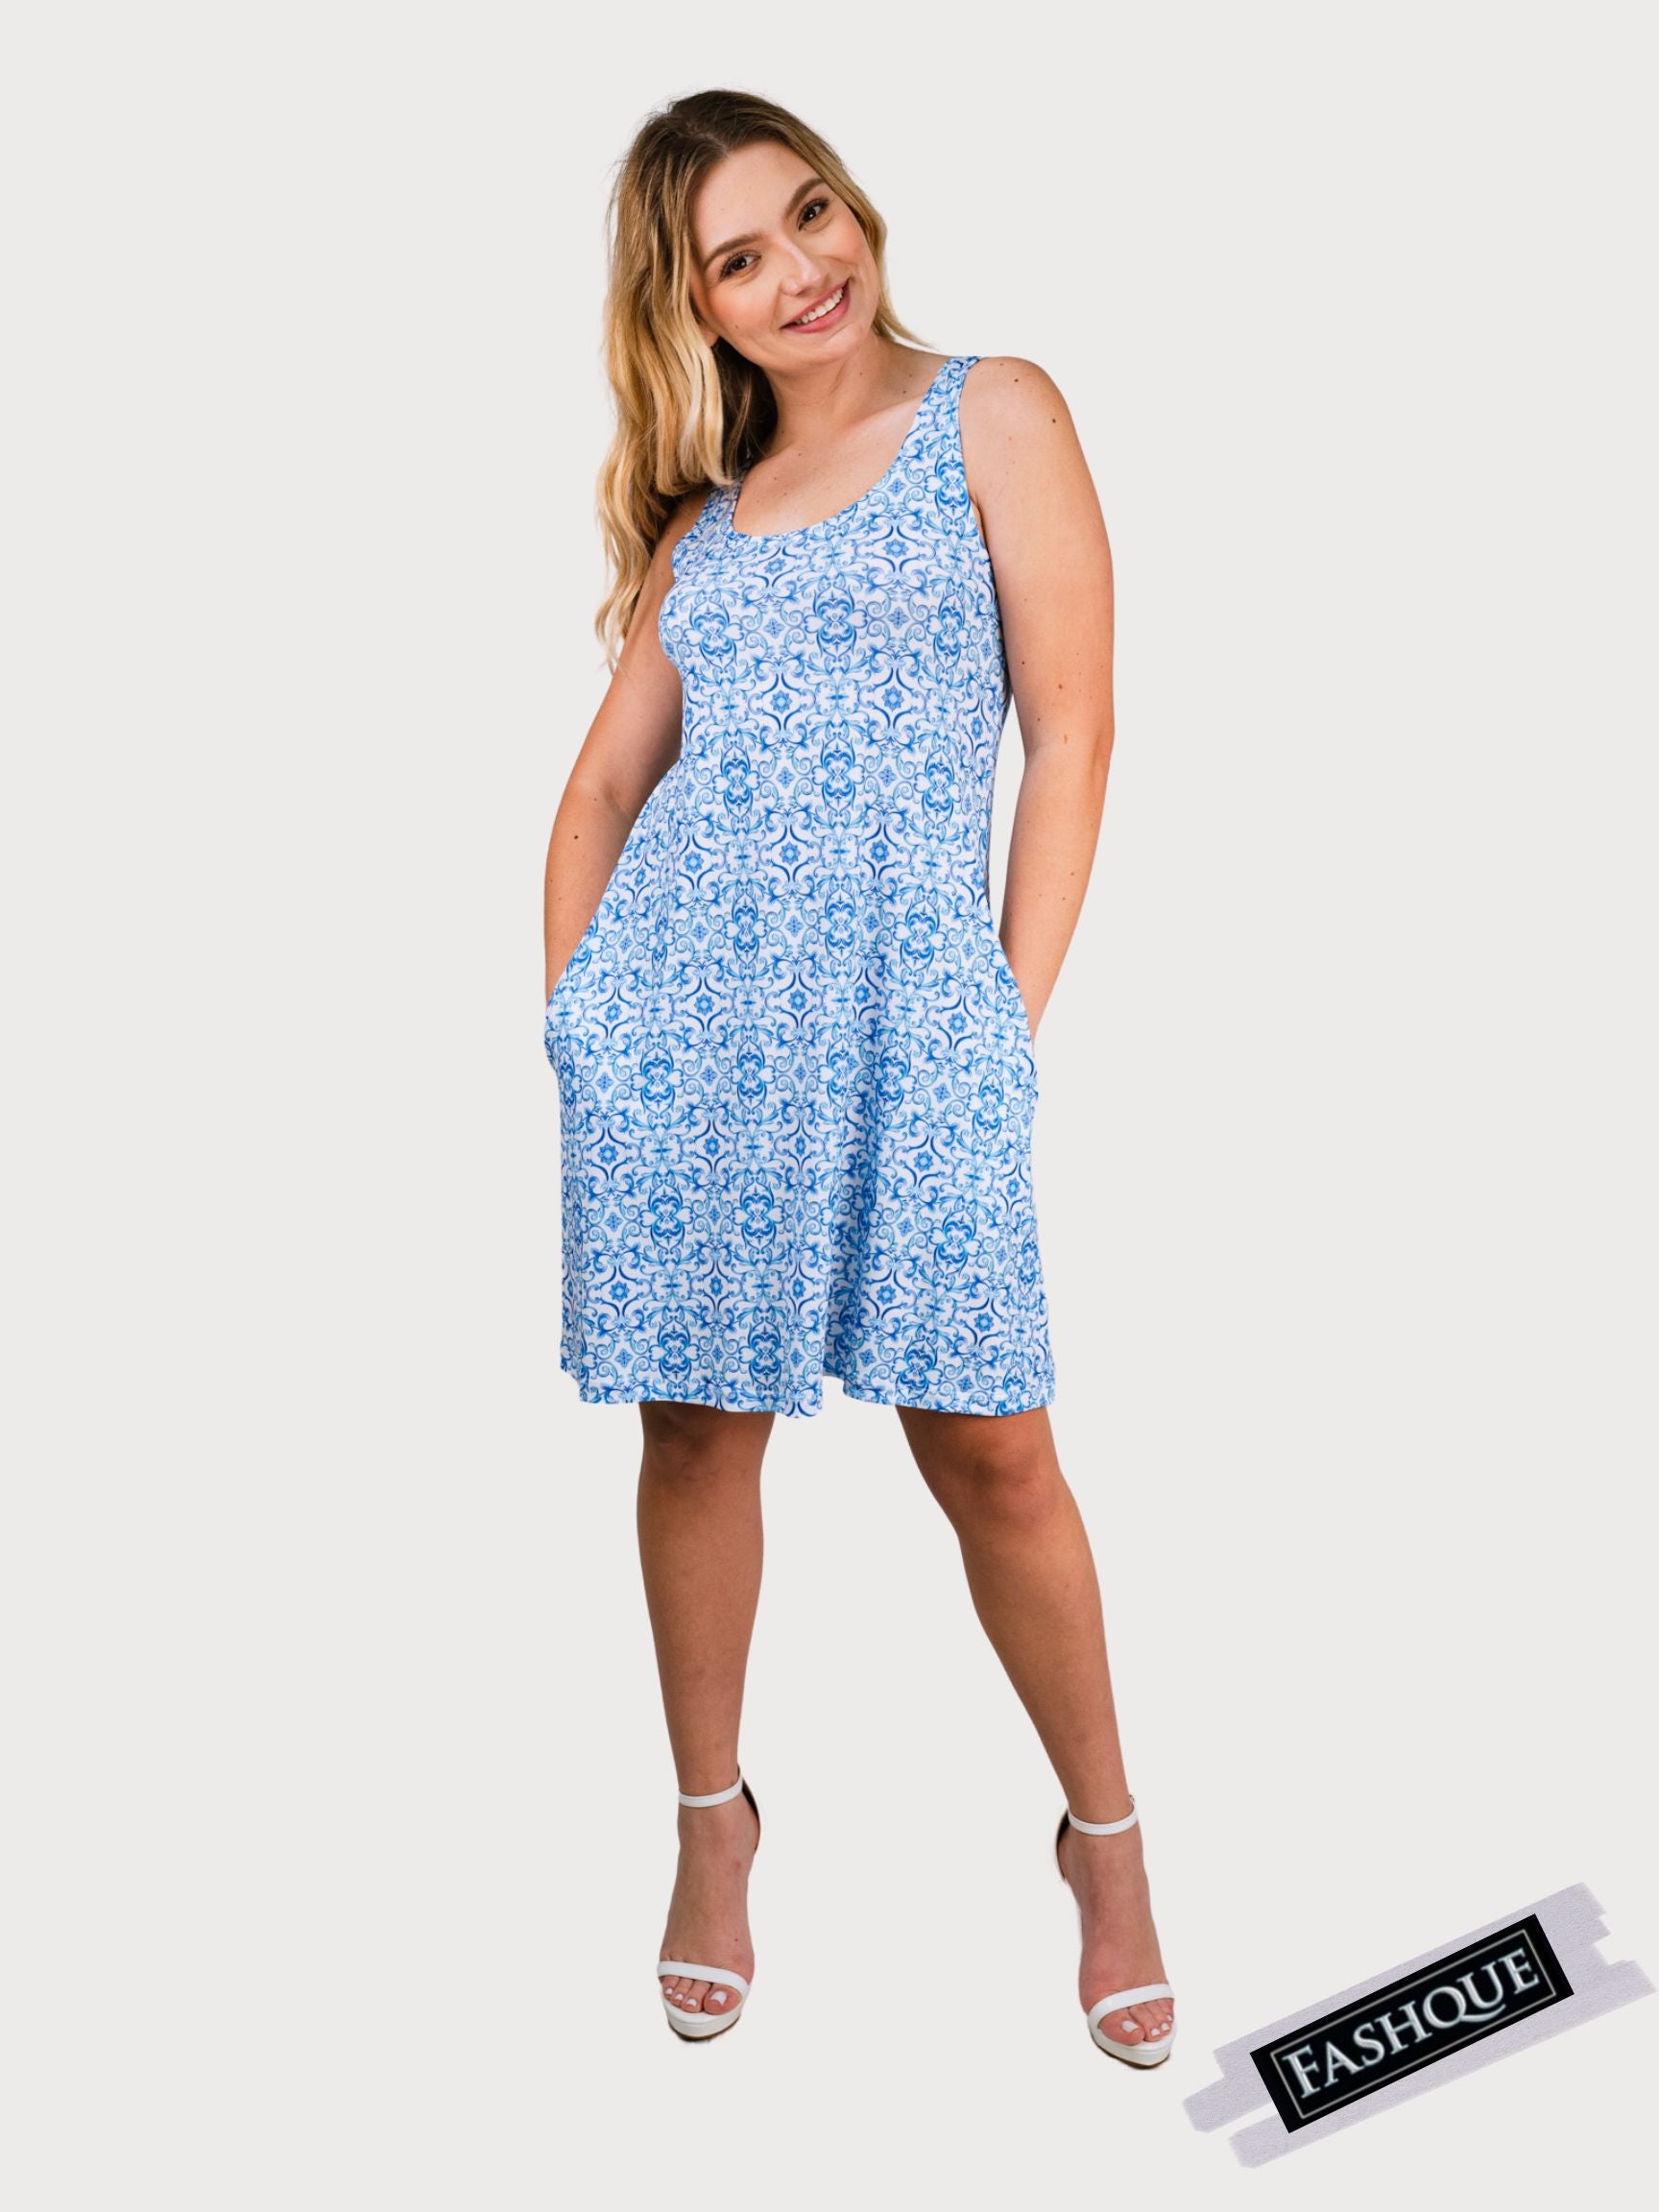 FASHQUE - SUNDRESS - Skater Style tank dress with square back with Pockets - D2061